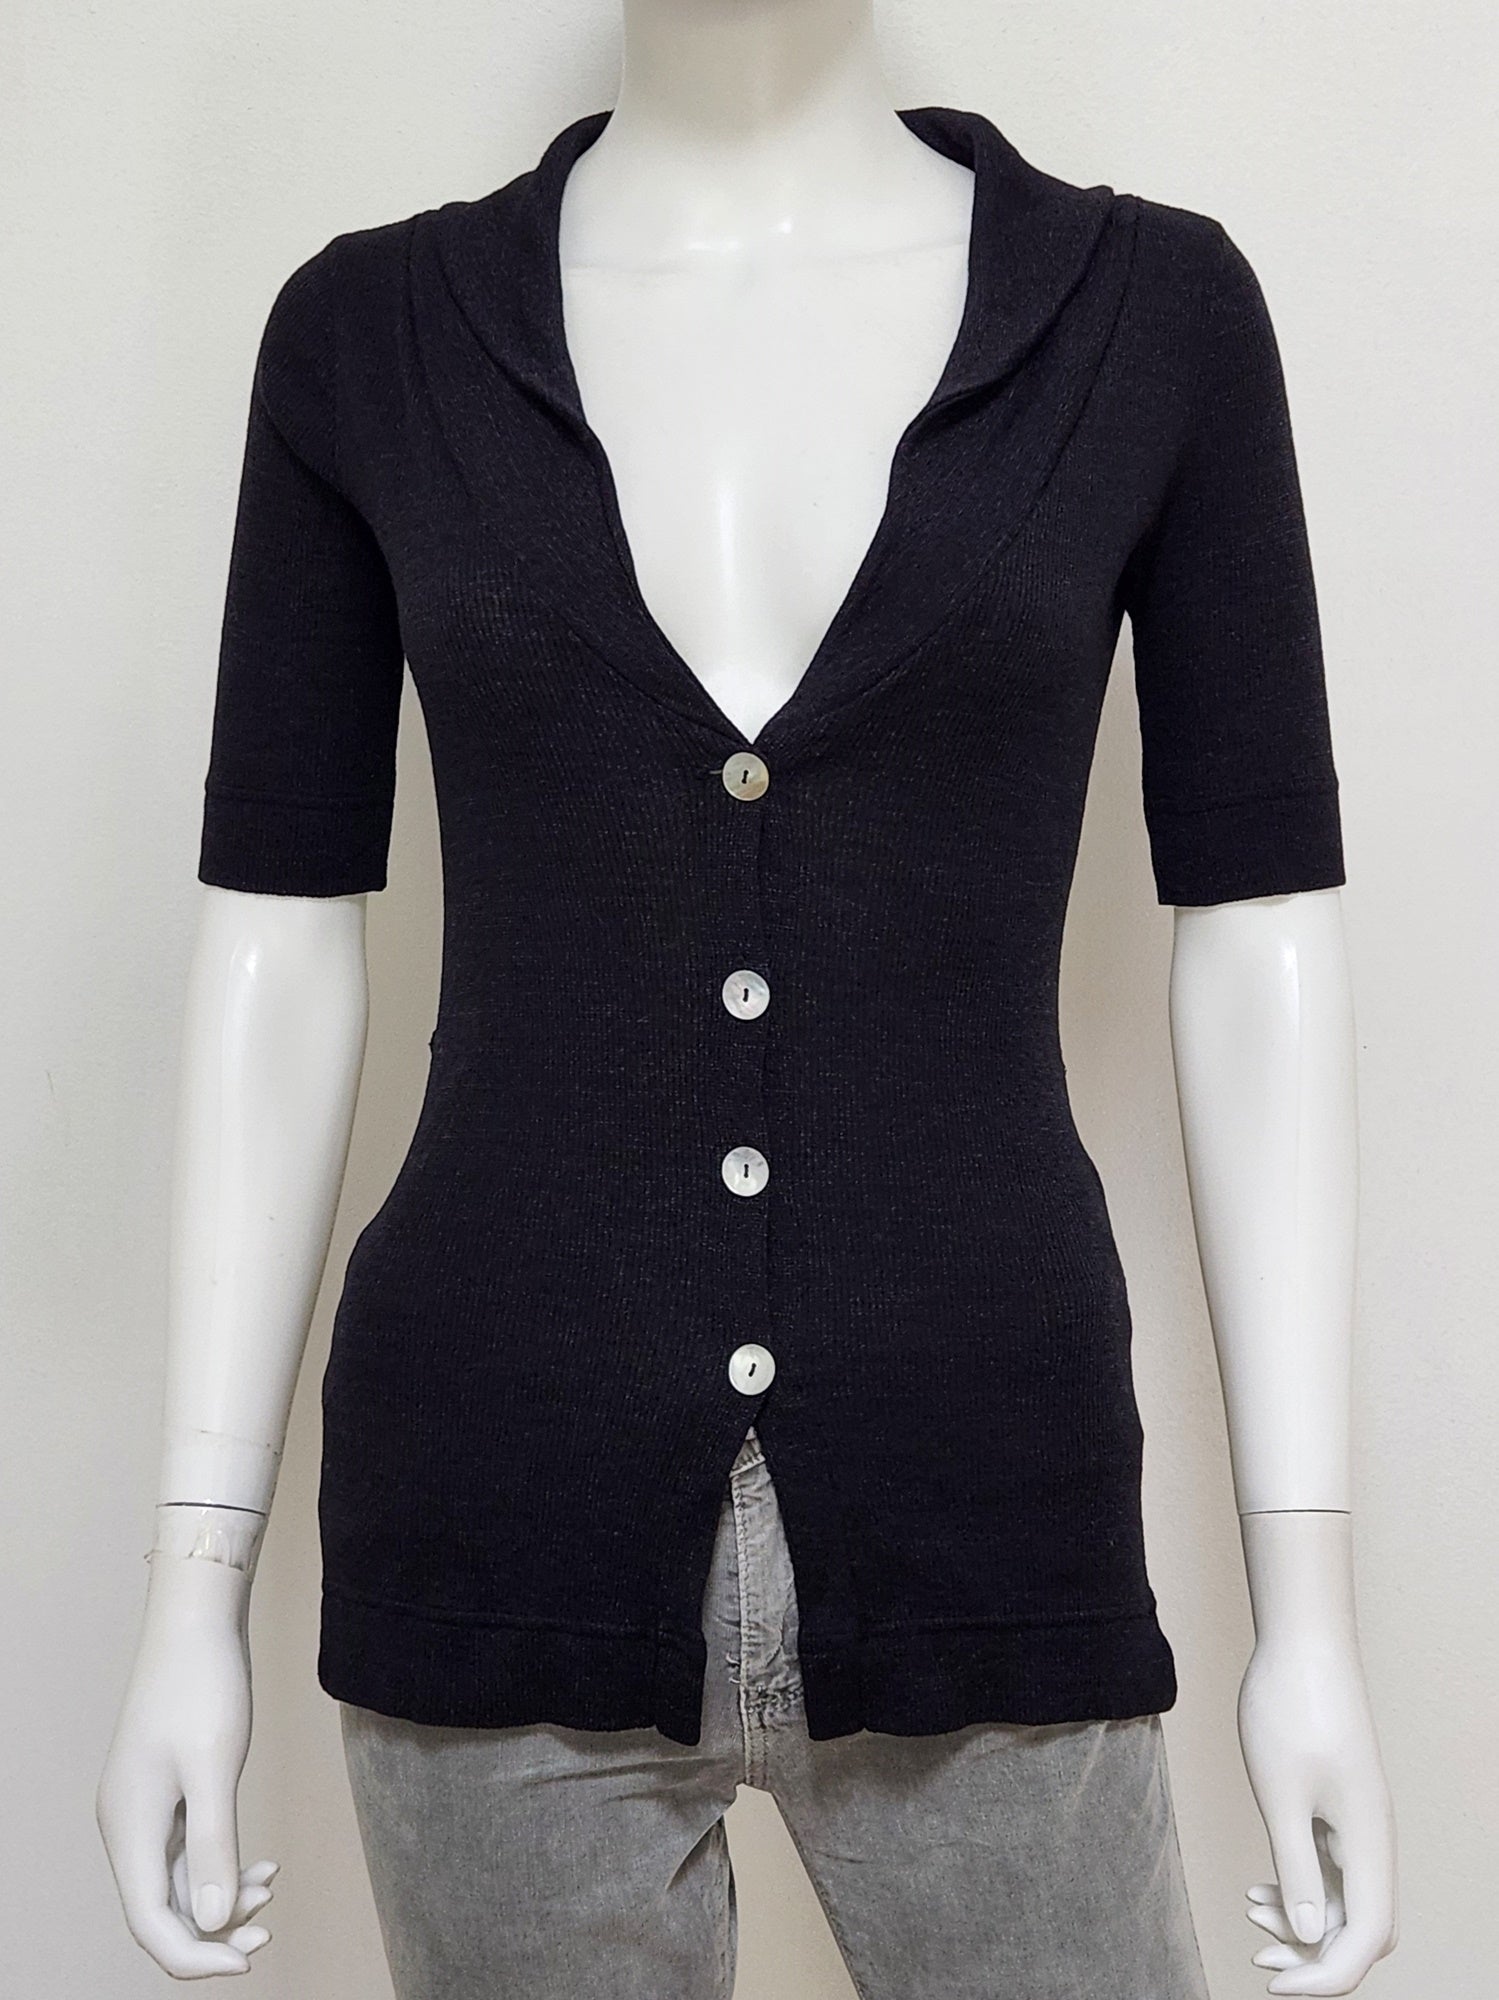 Button Front Cardigan Size Small/Medium